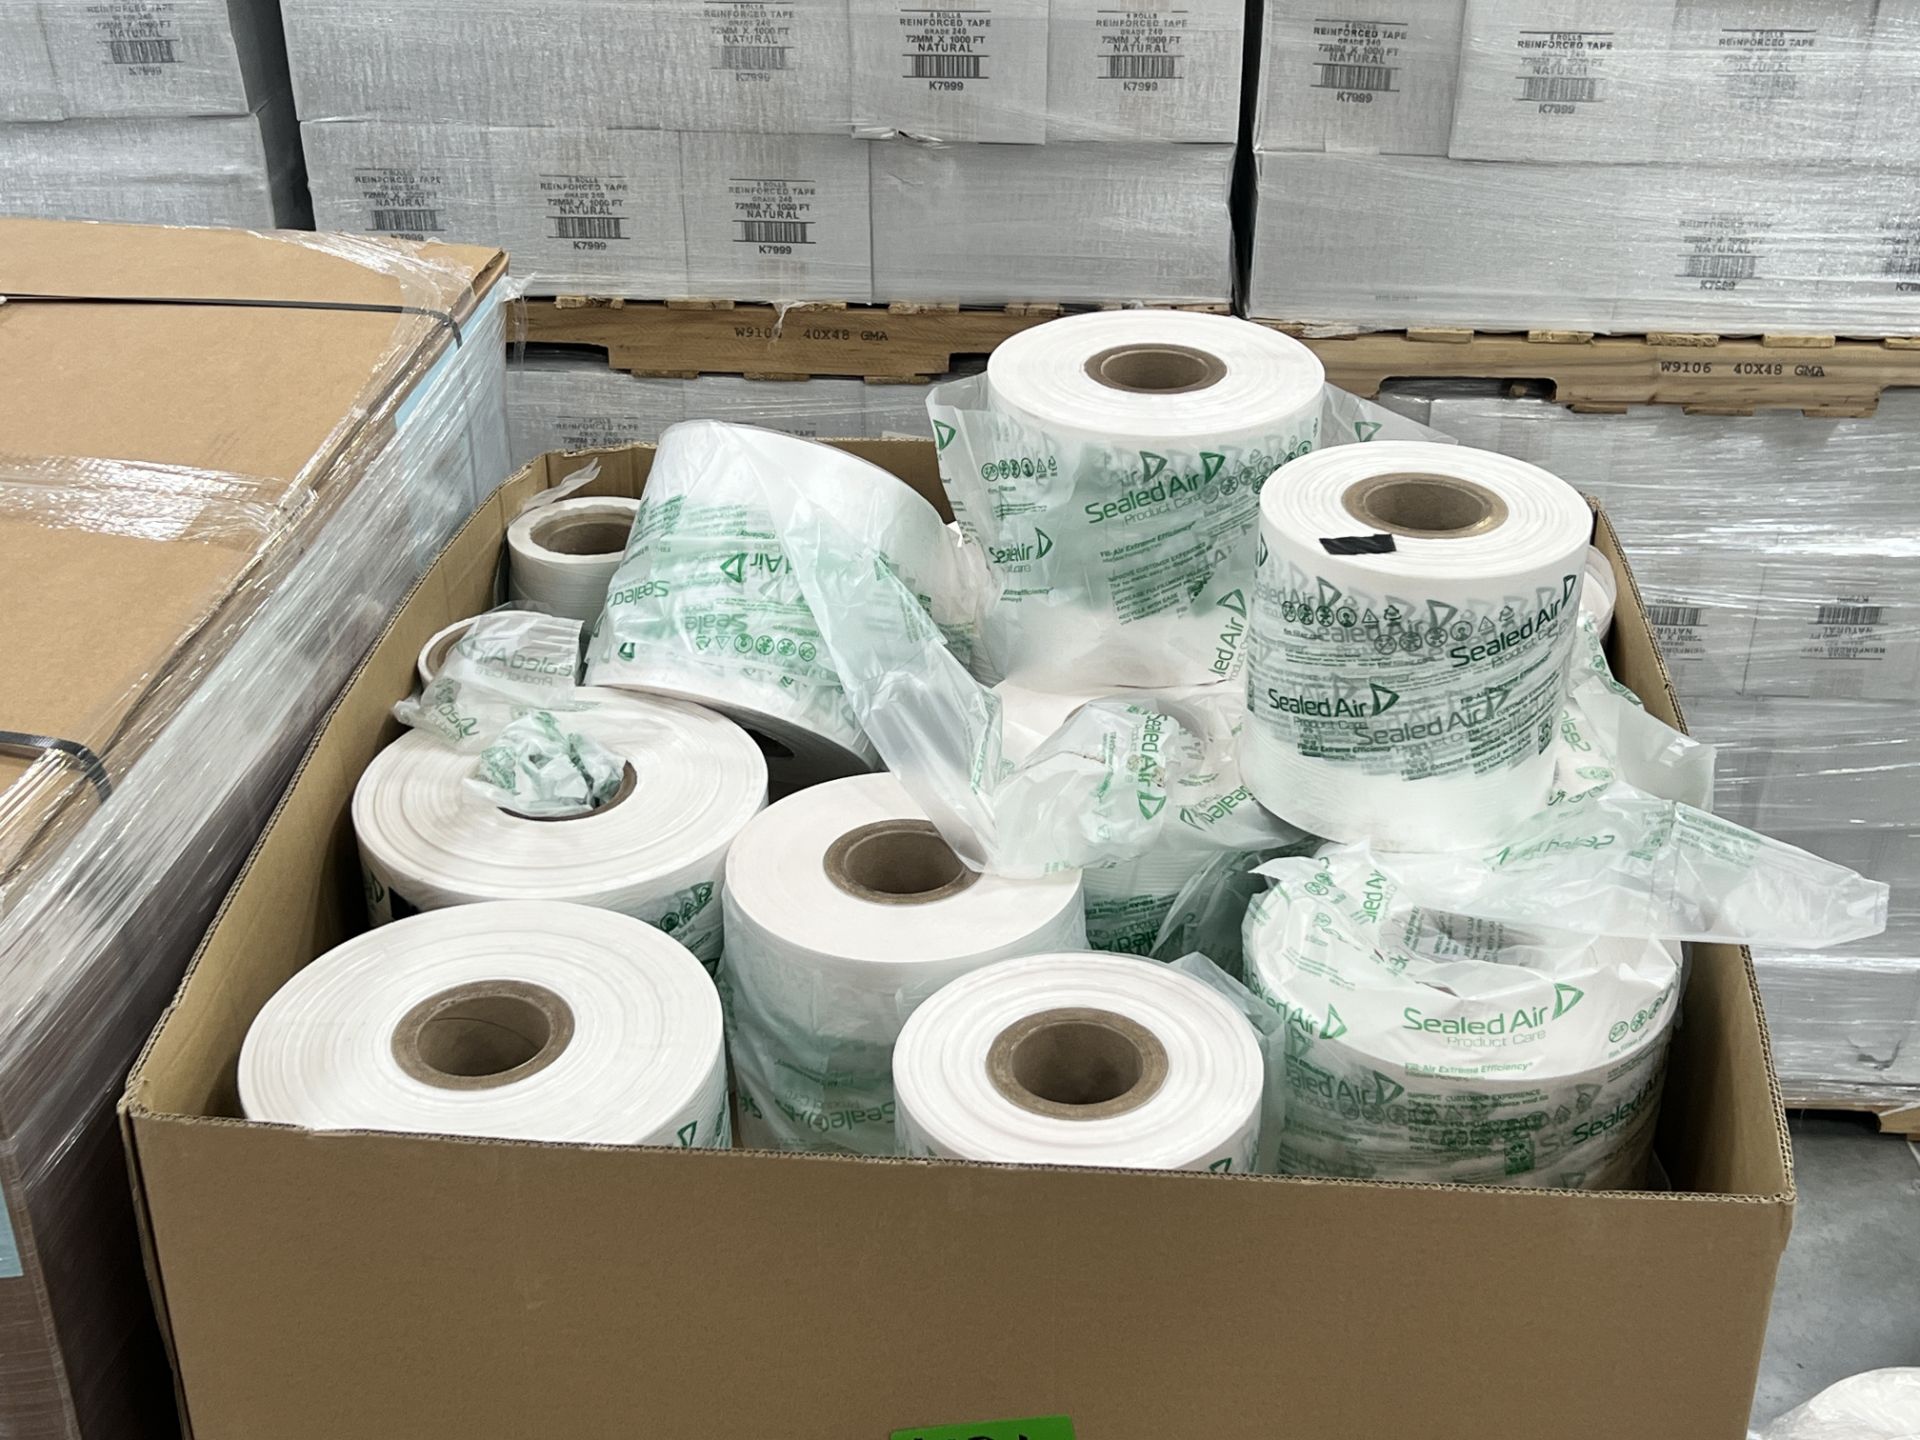 Sealed Air 8" x 5" Rolls - Image 4 of 6